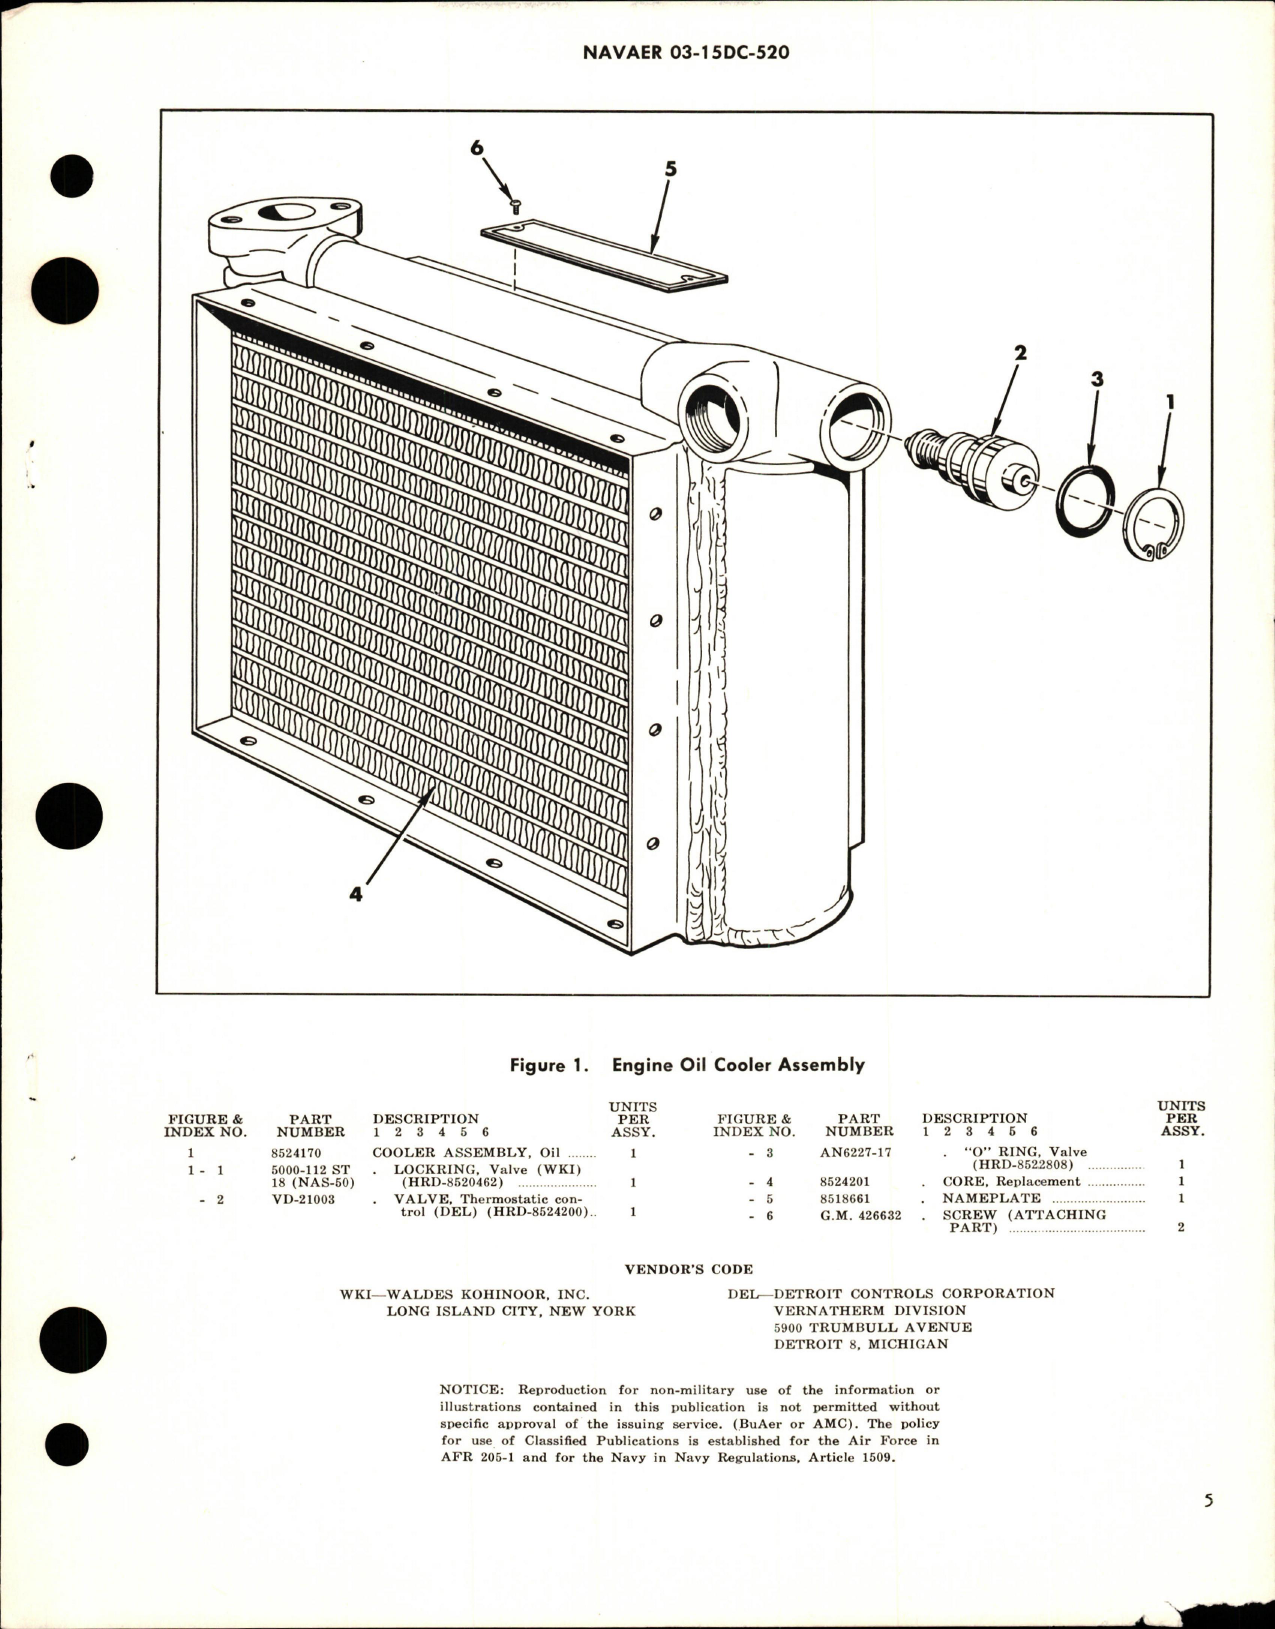 Sample page 5 from AirCorps Library document: Overhaul Instructions with Parts Breakdown for Engine Oil Cooler Assembly - Model AP16AN09-01 - Part 8524170